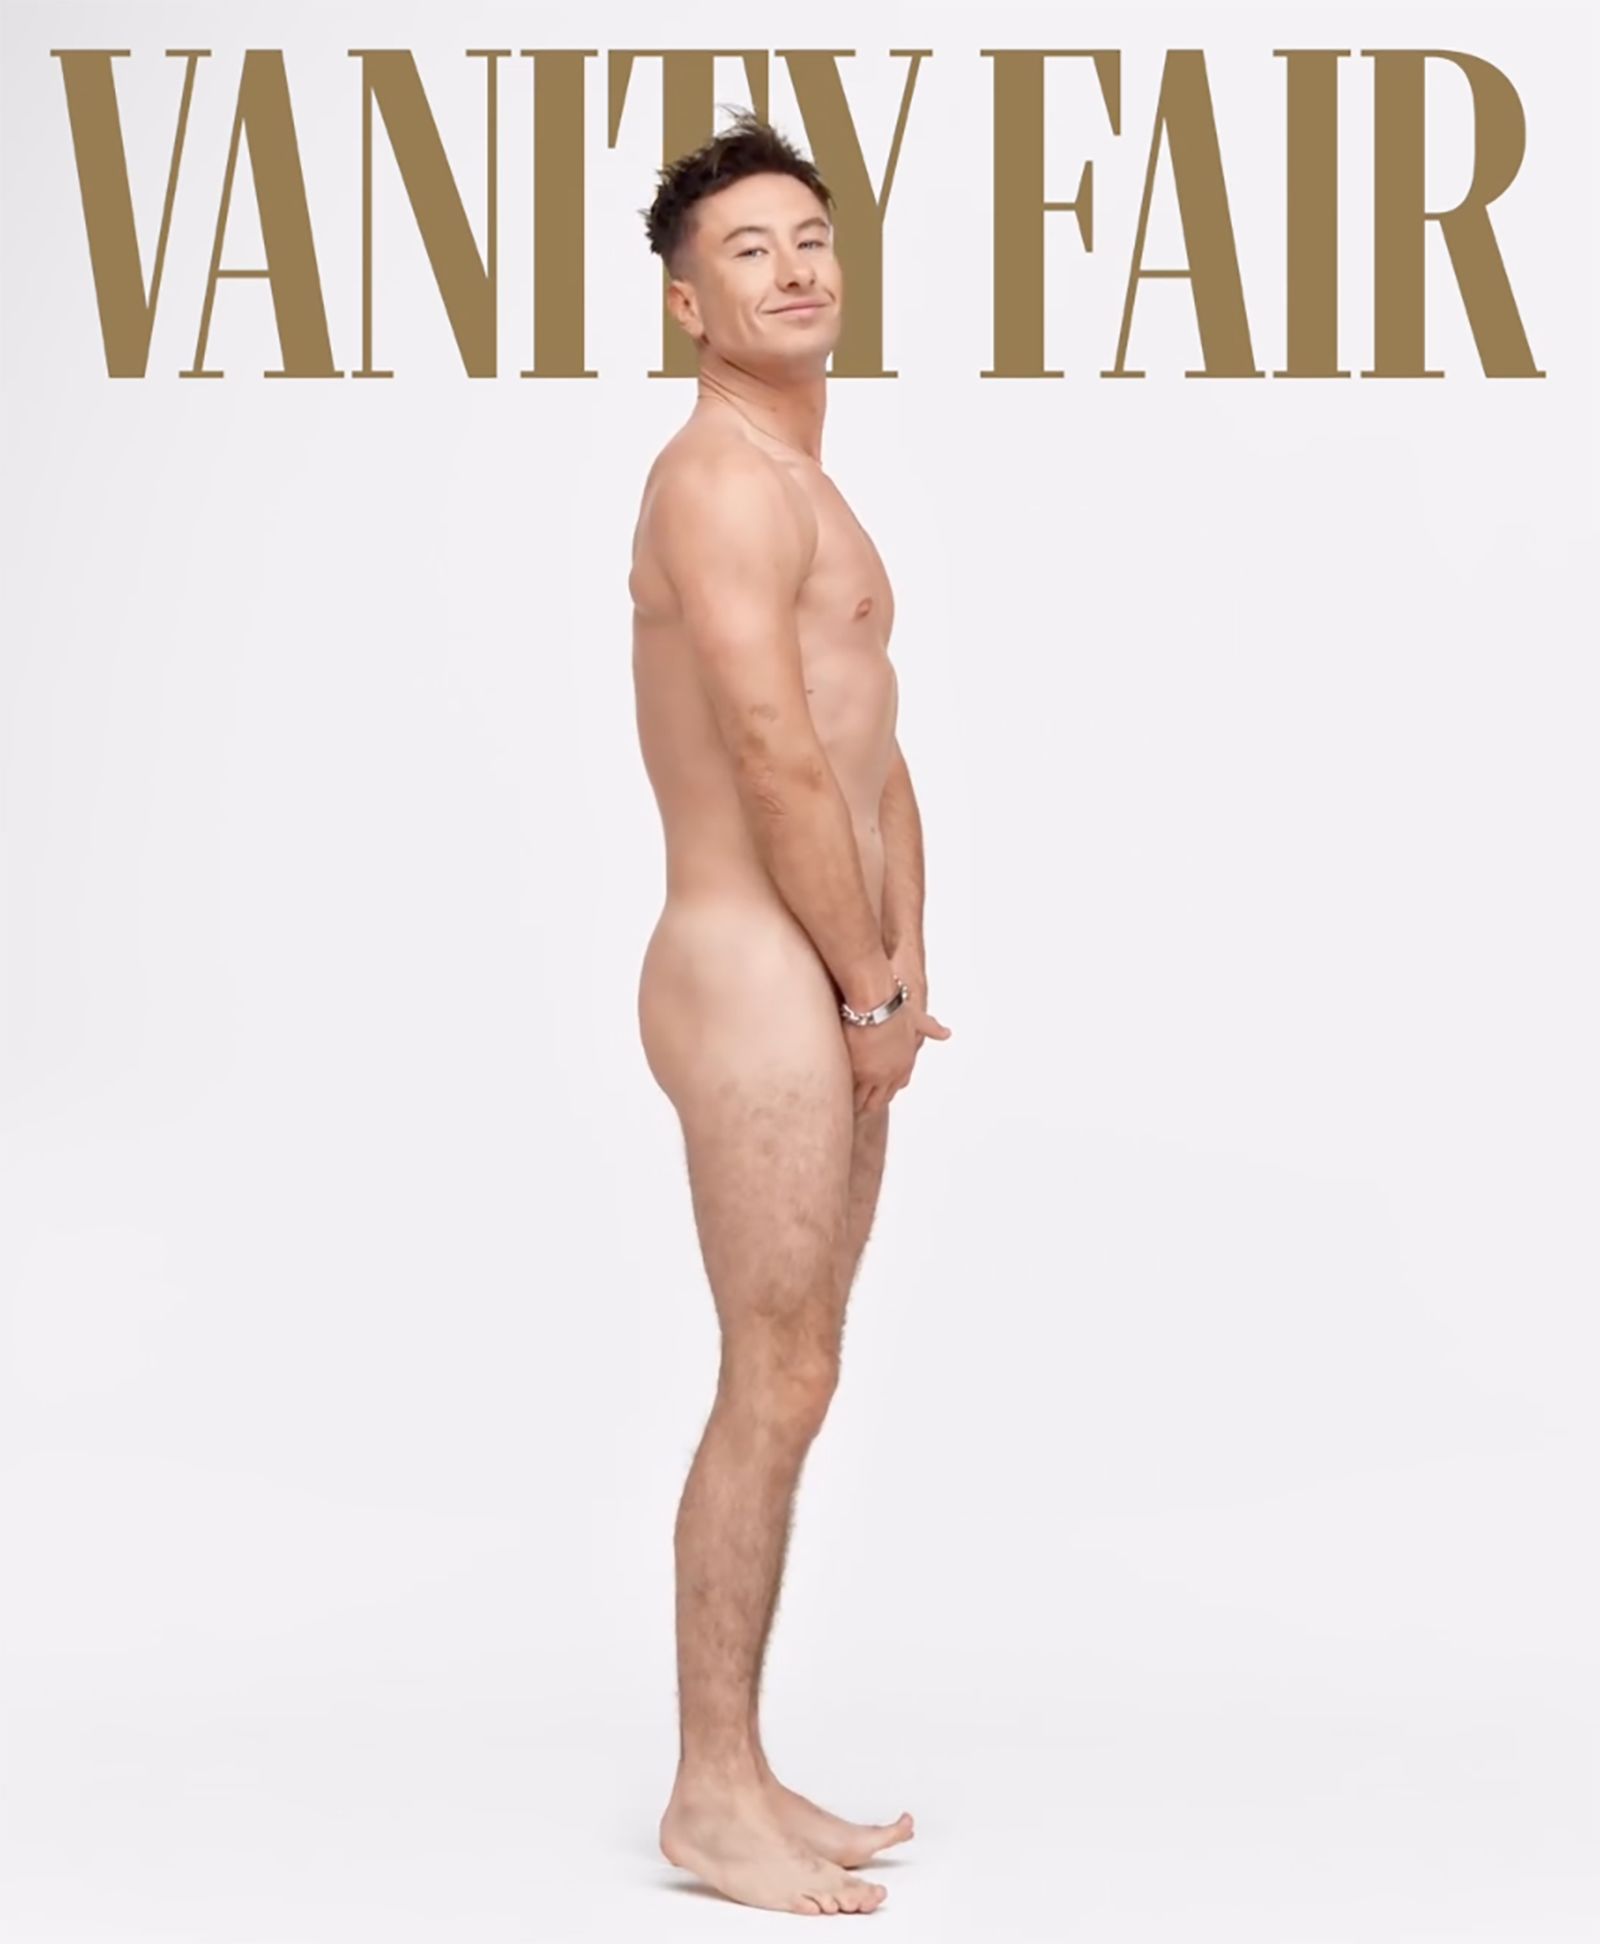 Barry Keoghan appears naked on 'Vanity Fair' cover. Is it progressive, or  passé?